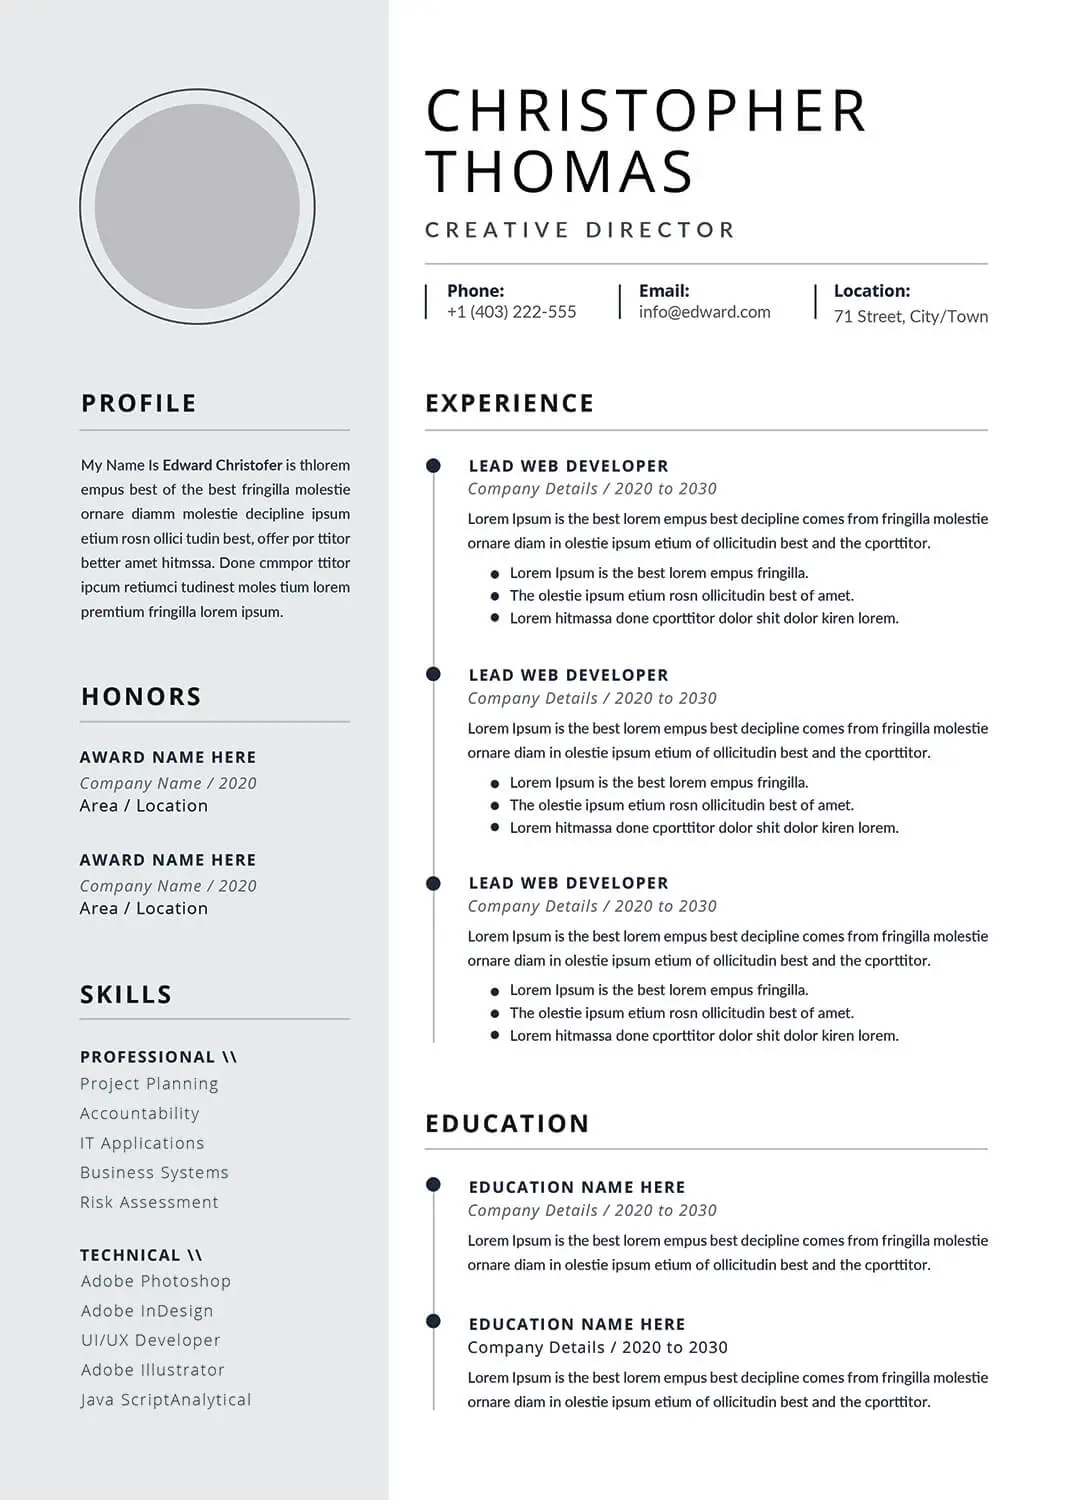 Best resume format for personal
bankers